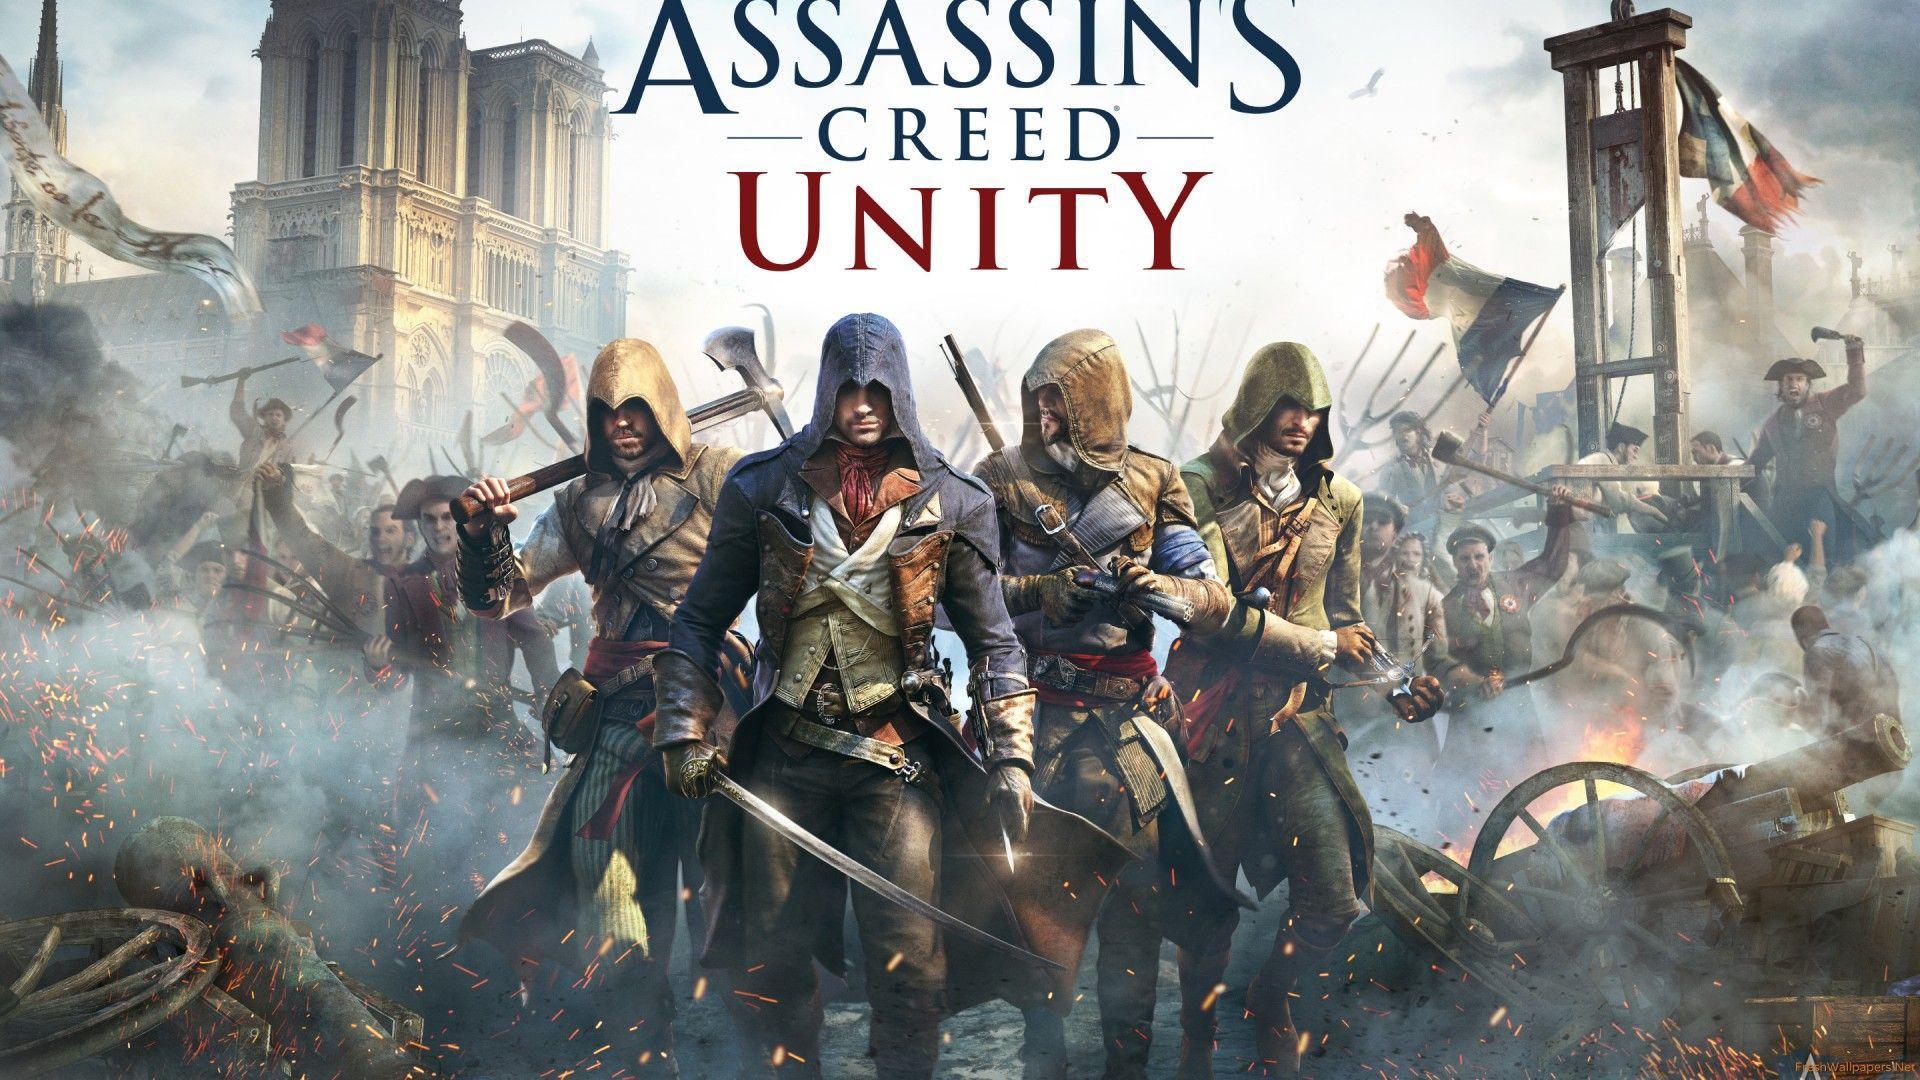 Collection of Assassins Creed Unity Wallpaper on HDWallpaper